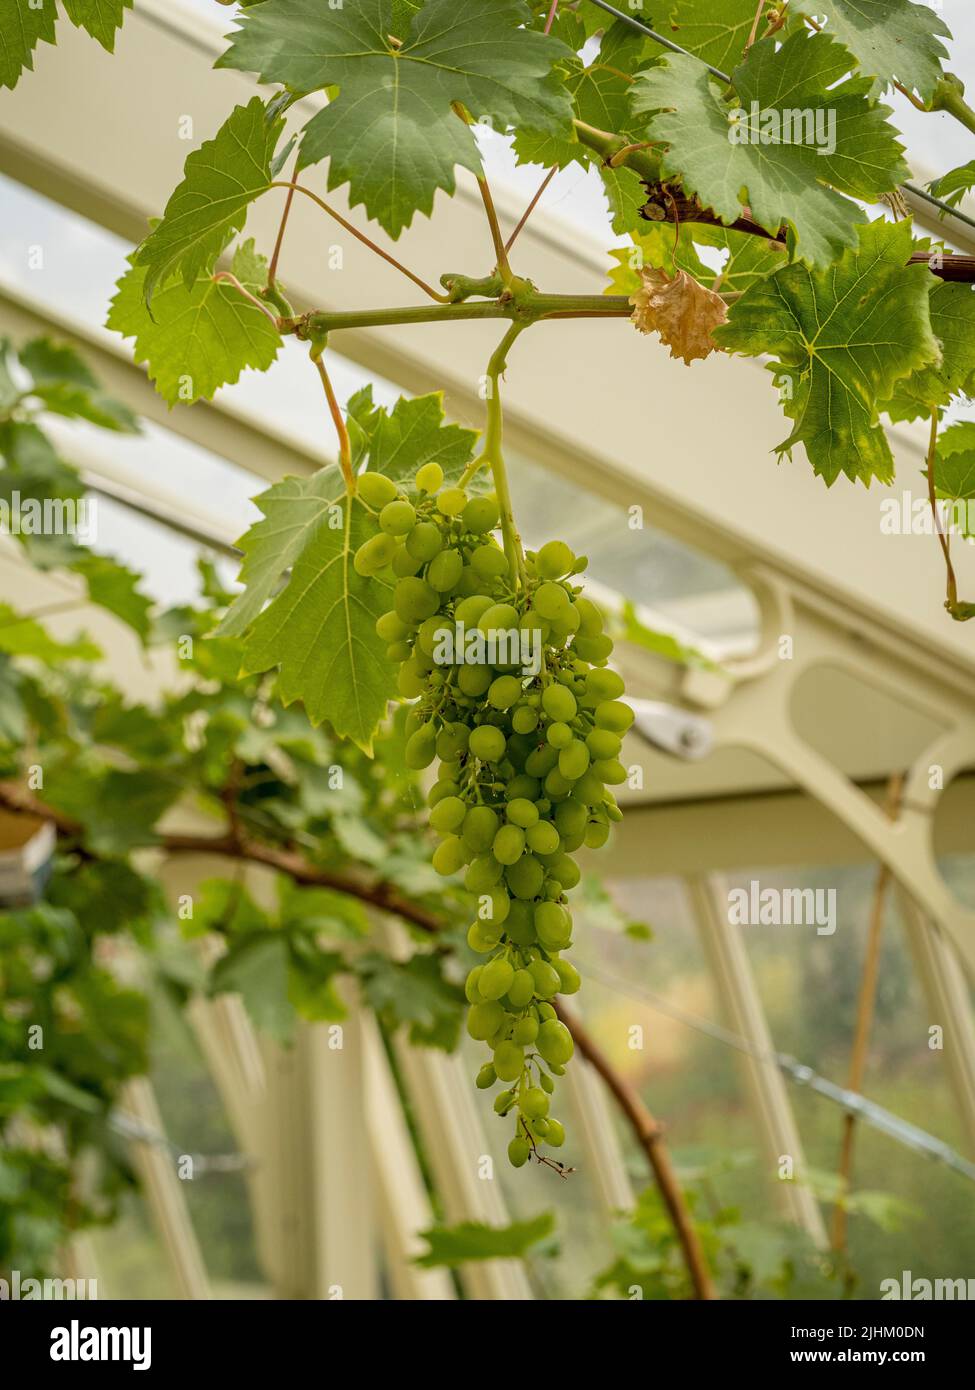 Bunches of green grapes hanging from the vine in a UK greenhouse. Stock Photo